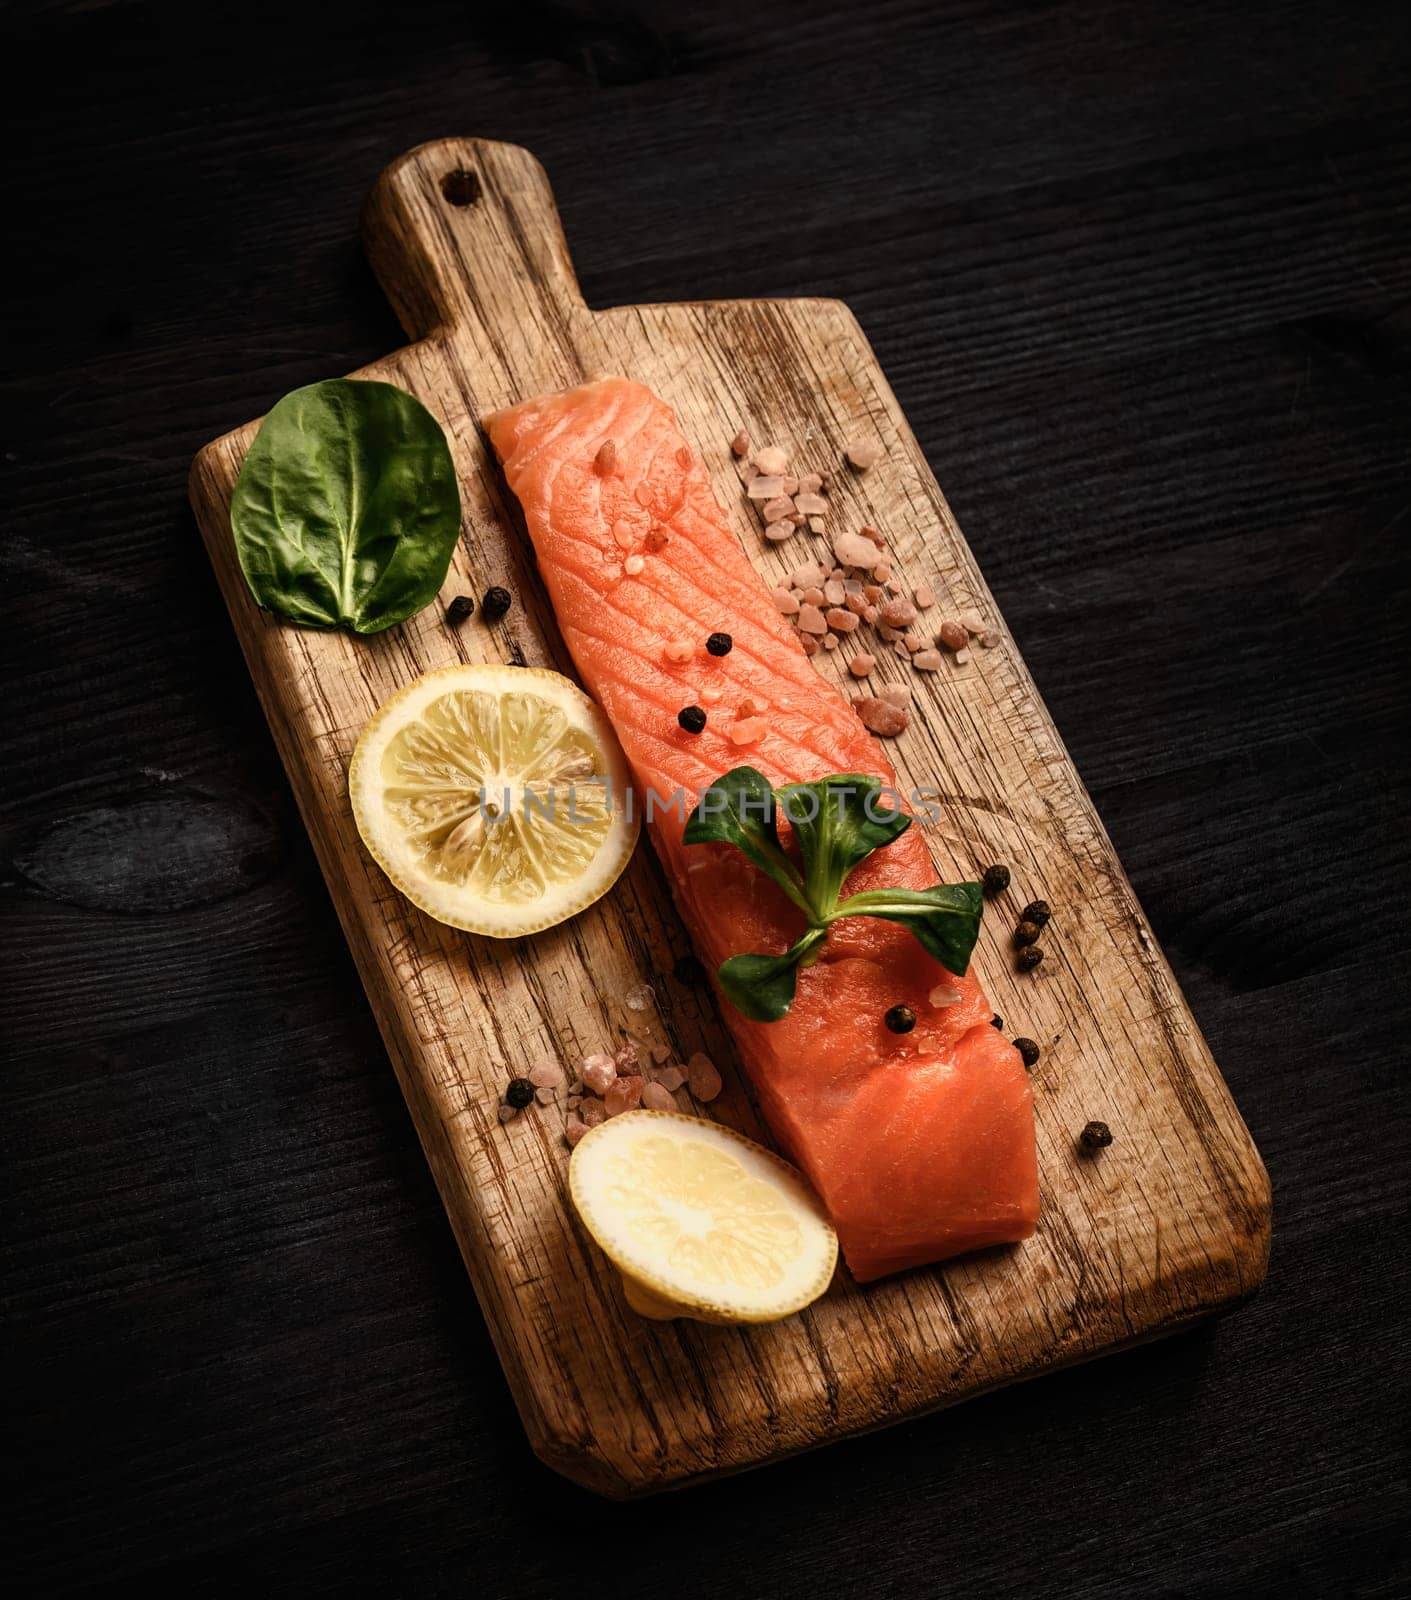 Raw red fish salmon fillet with herbs and lemon on a cutting board ready for cooking healthy dinner